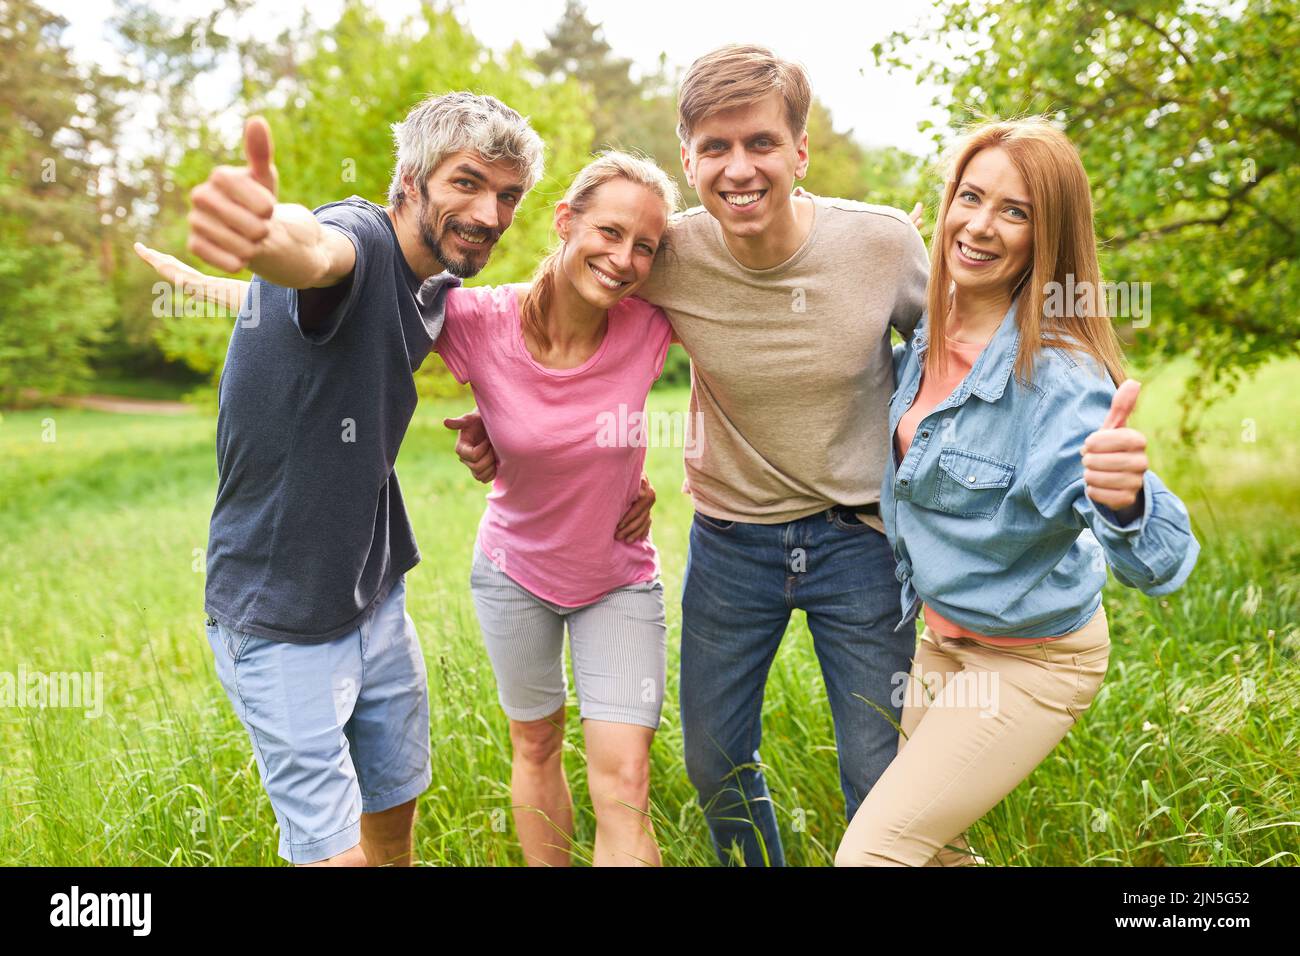 Group of young people as friends showing thumbs up for optimism and community Stock Photo